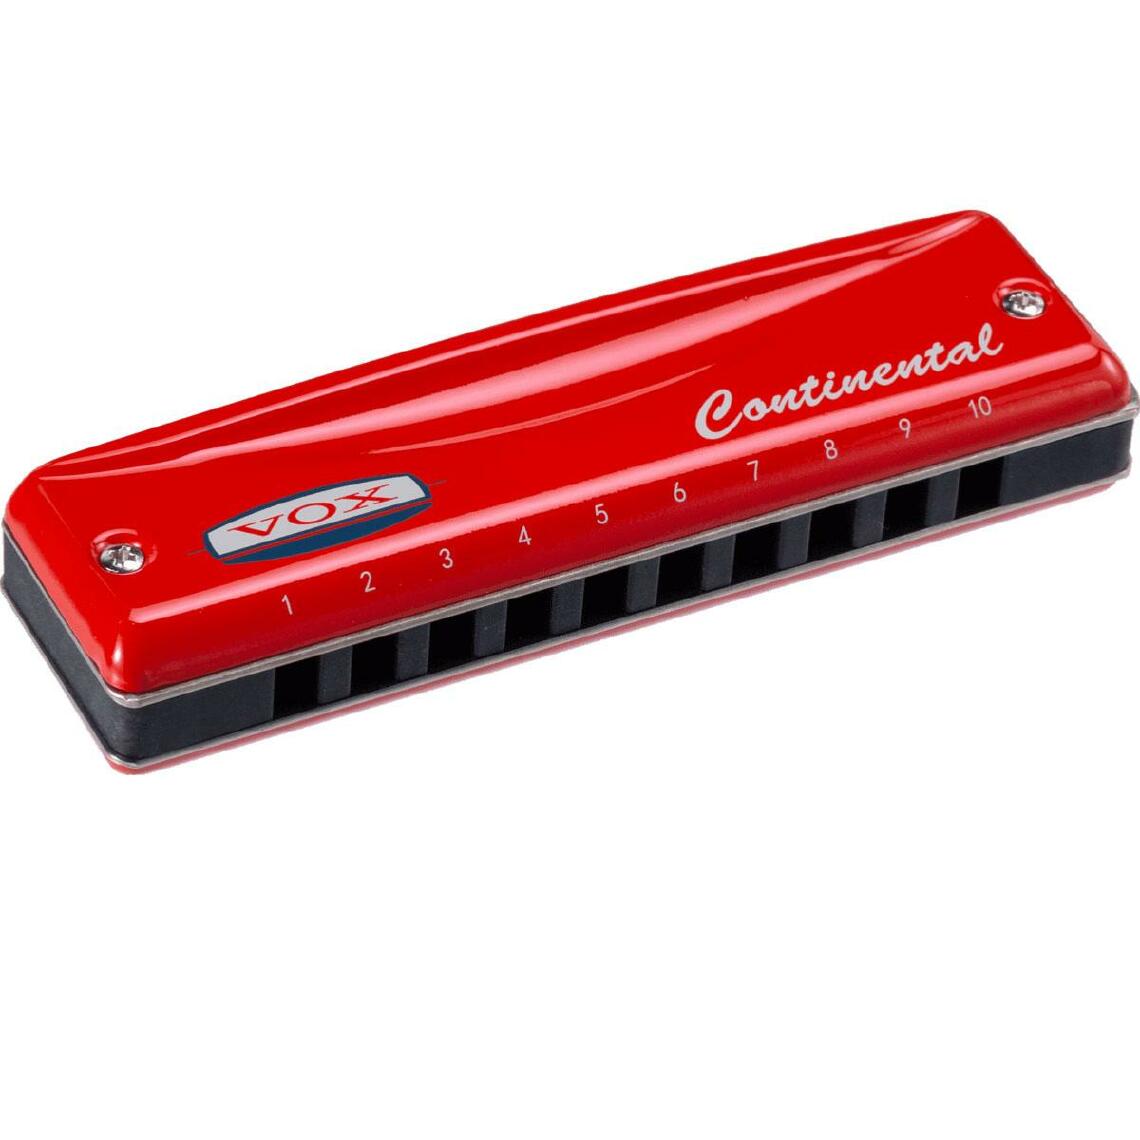 Vox - VOX VVO VCH-2-C - Continental Type-2 - Continental Type-2 10 trous - Do - Harmonica